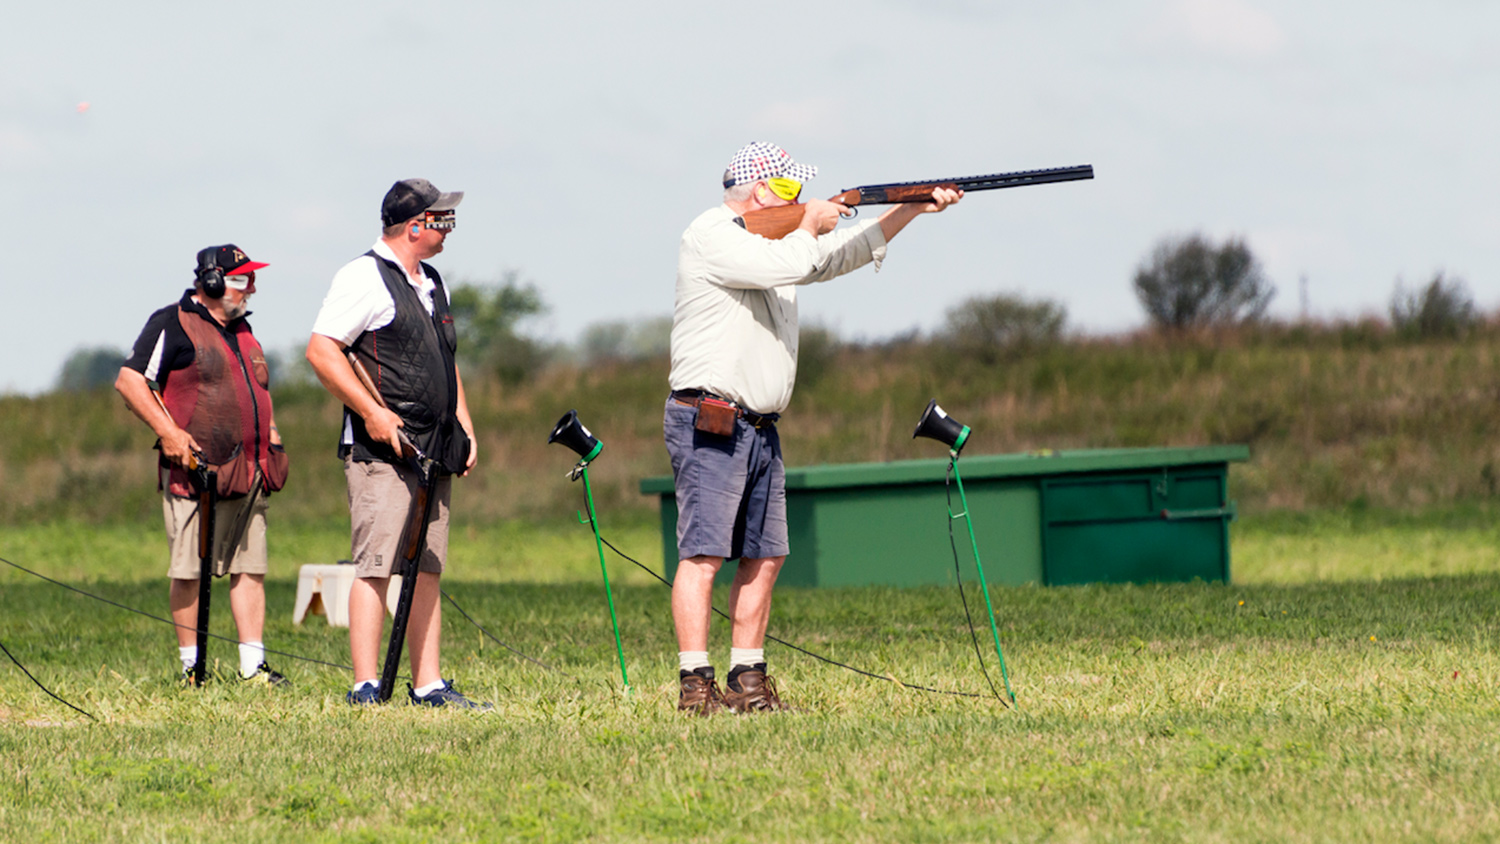 Tradition of trapshooting